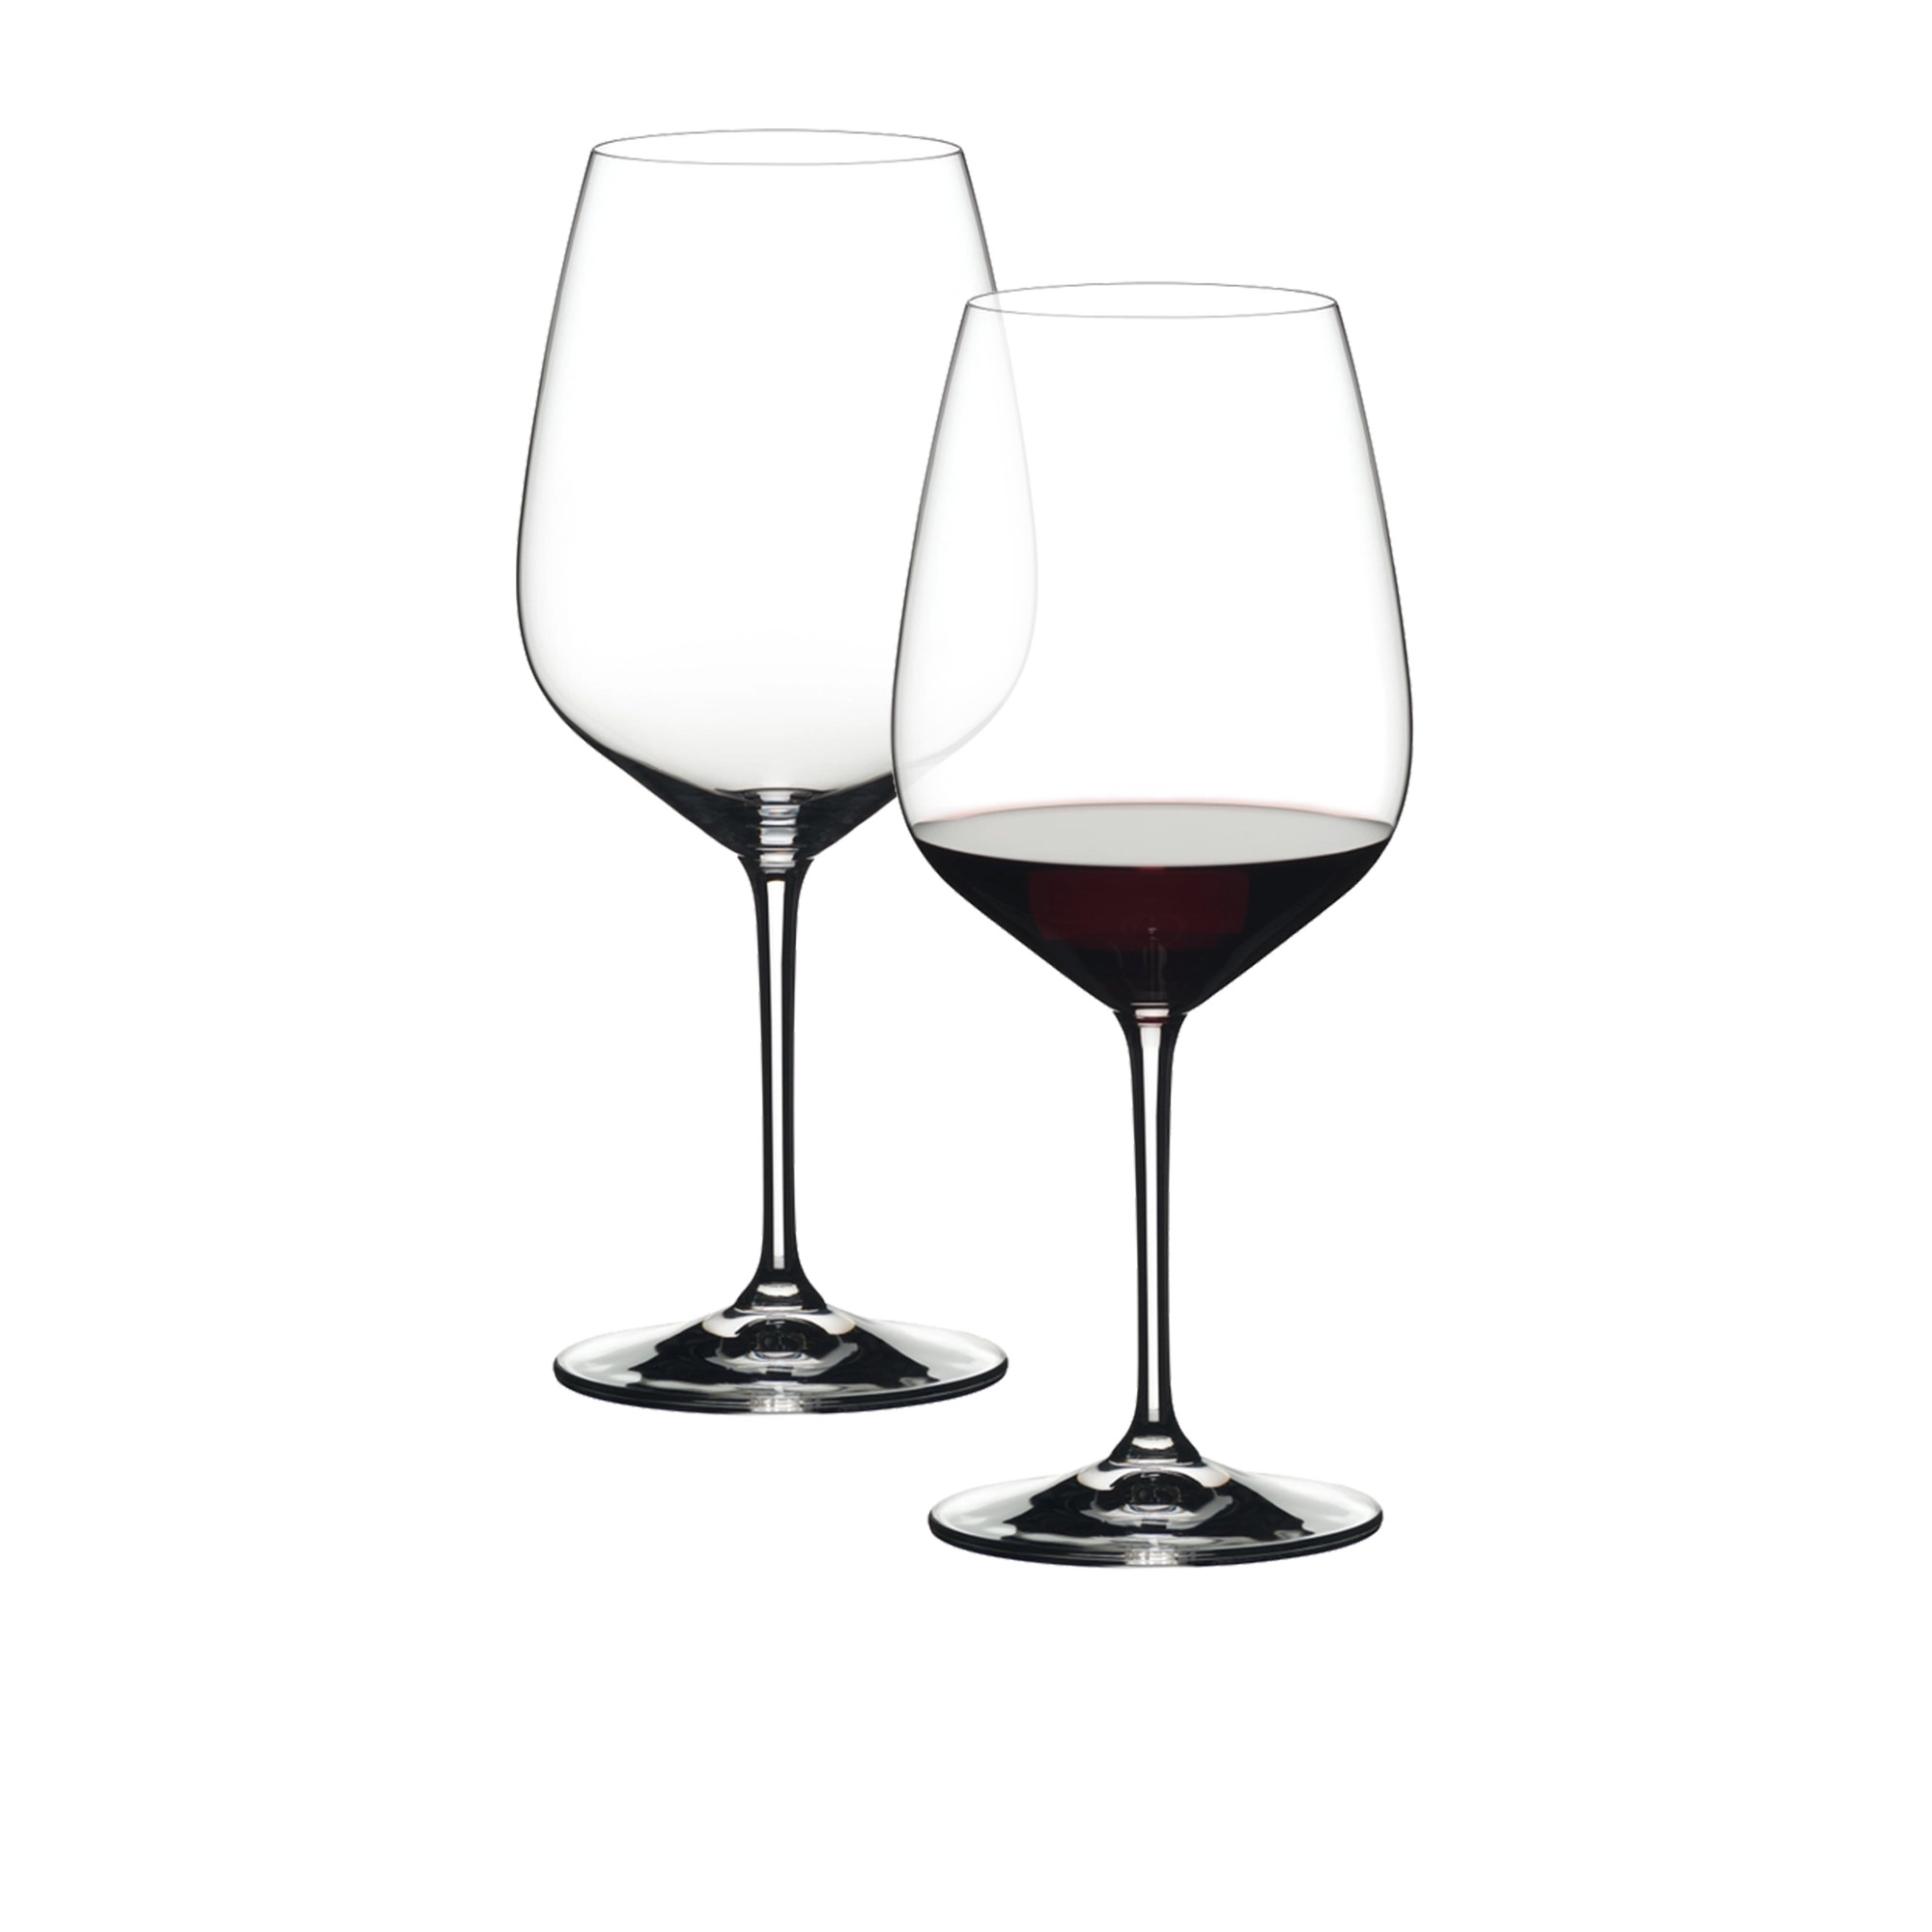 Riedel Extreme Cabernet Glass 800ml Set of 2 Image 1